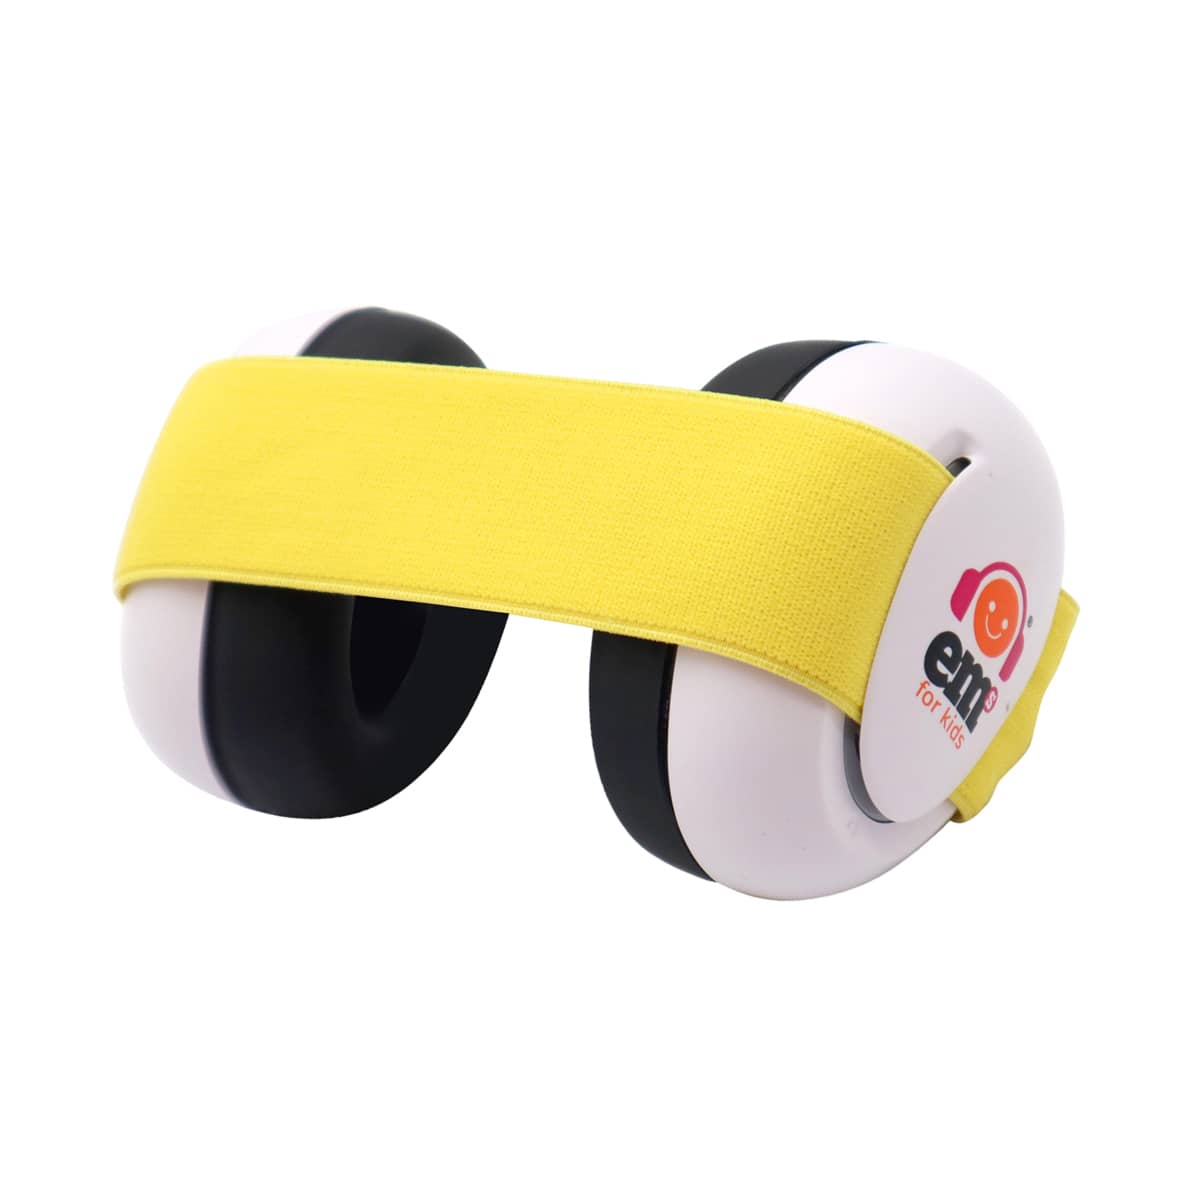 Ems for Kids Baby Earmuffs - White with Yellow Headband